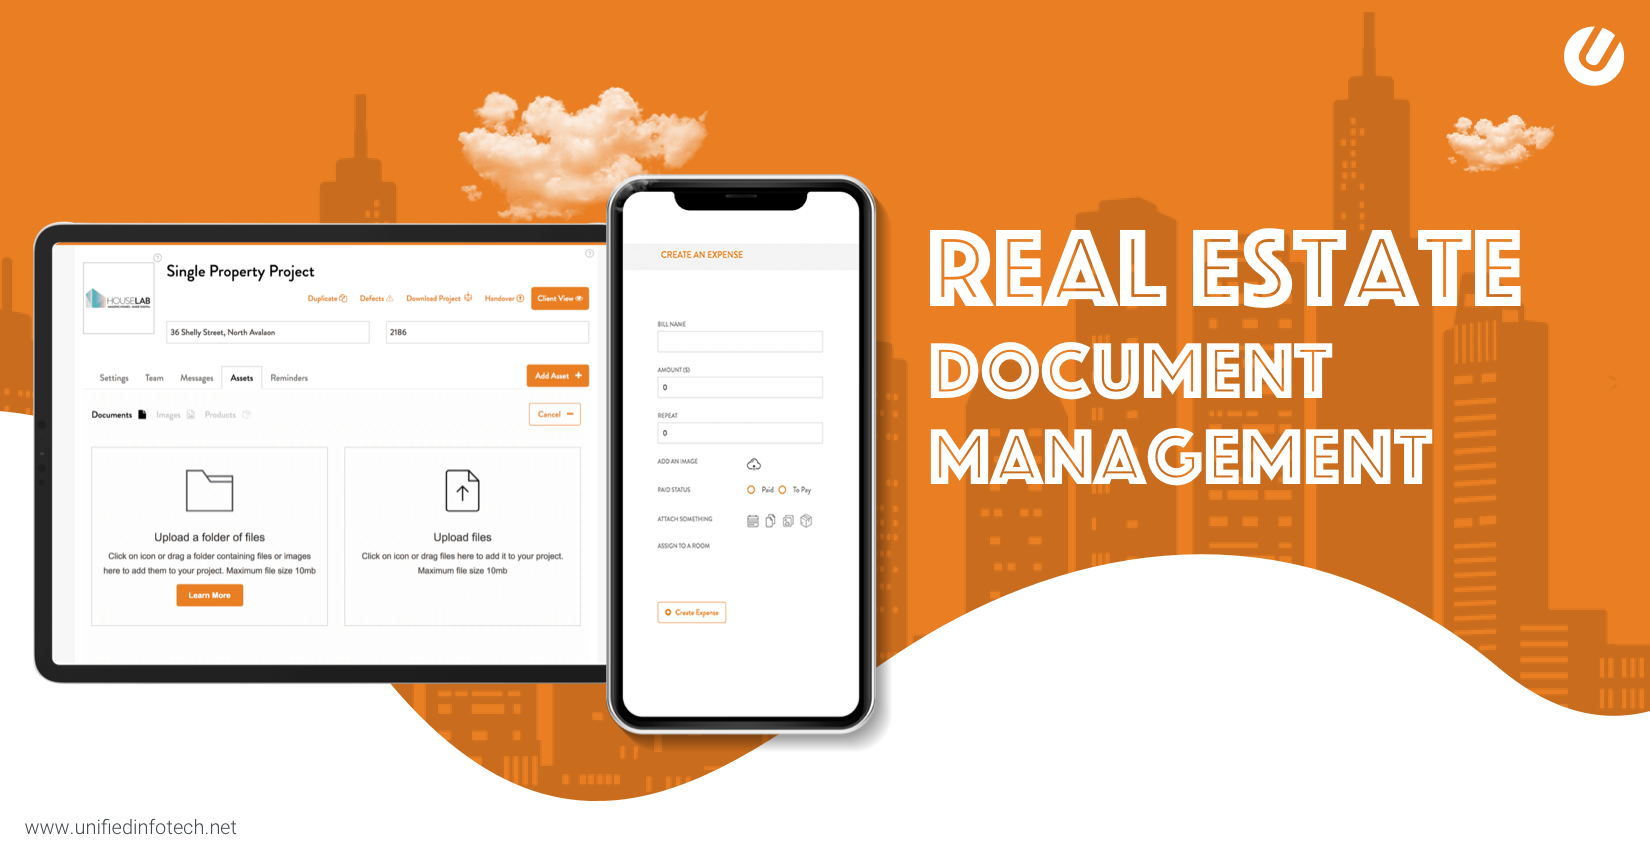 Why You Need A Real Estate Document Management System